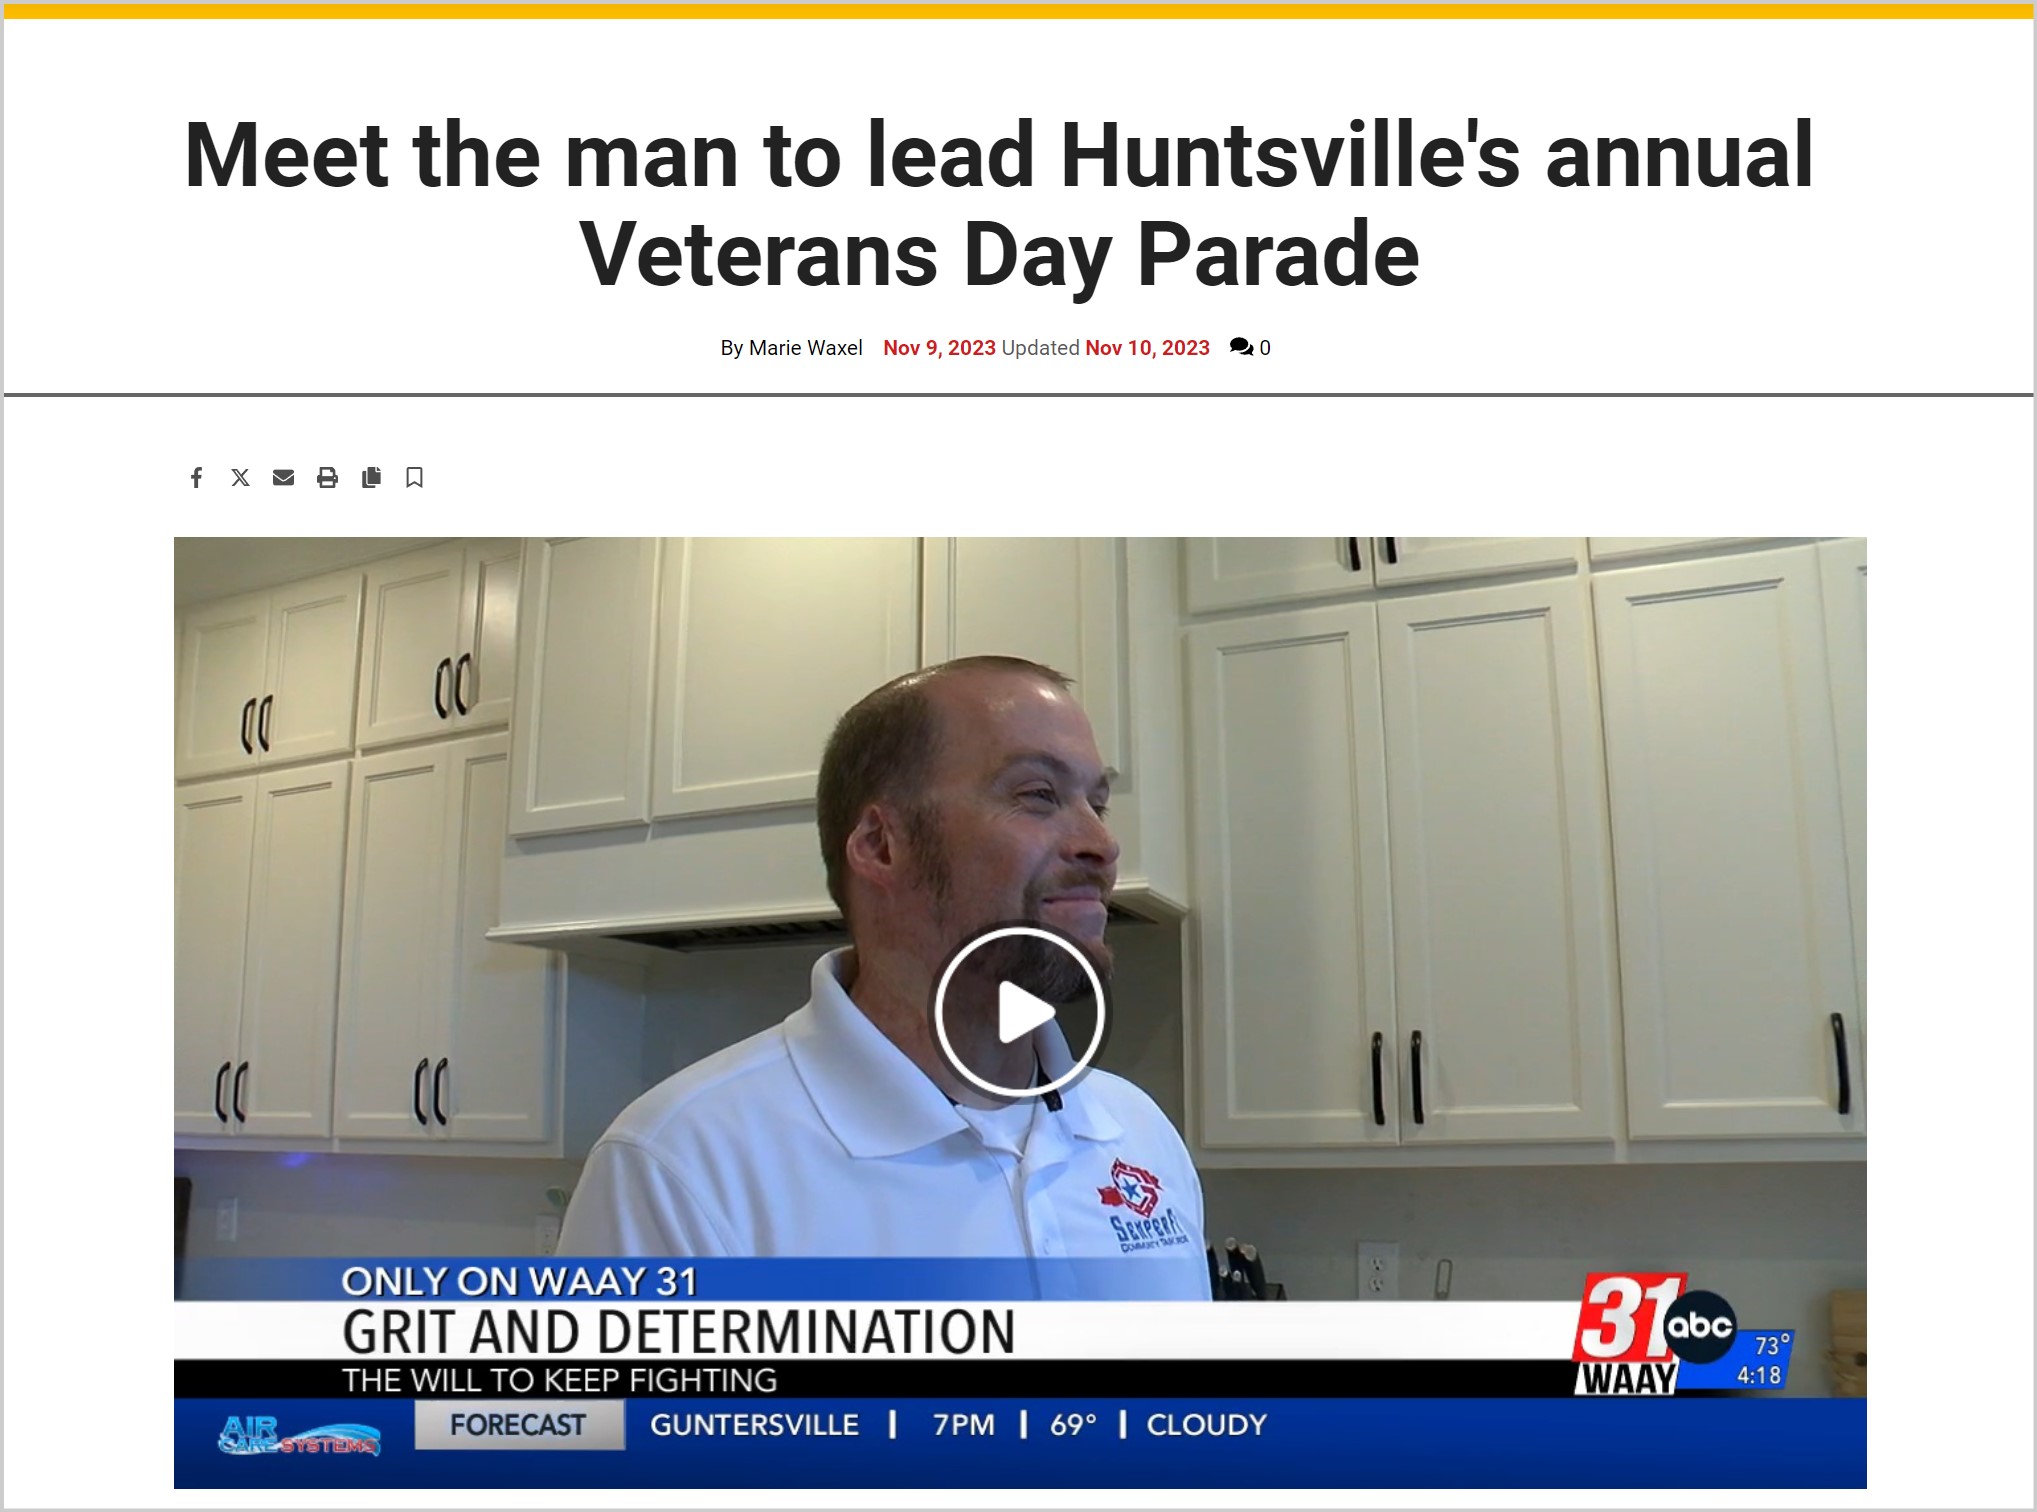 James West to Lead Veterans Day Parade 2023